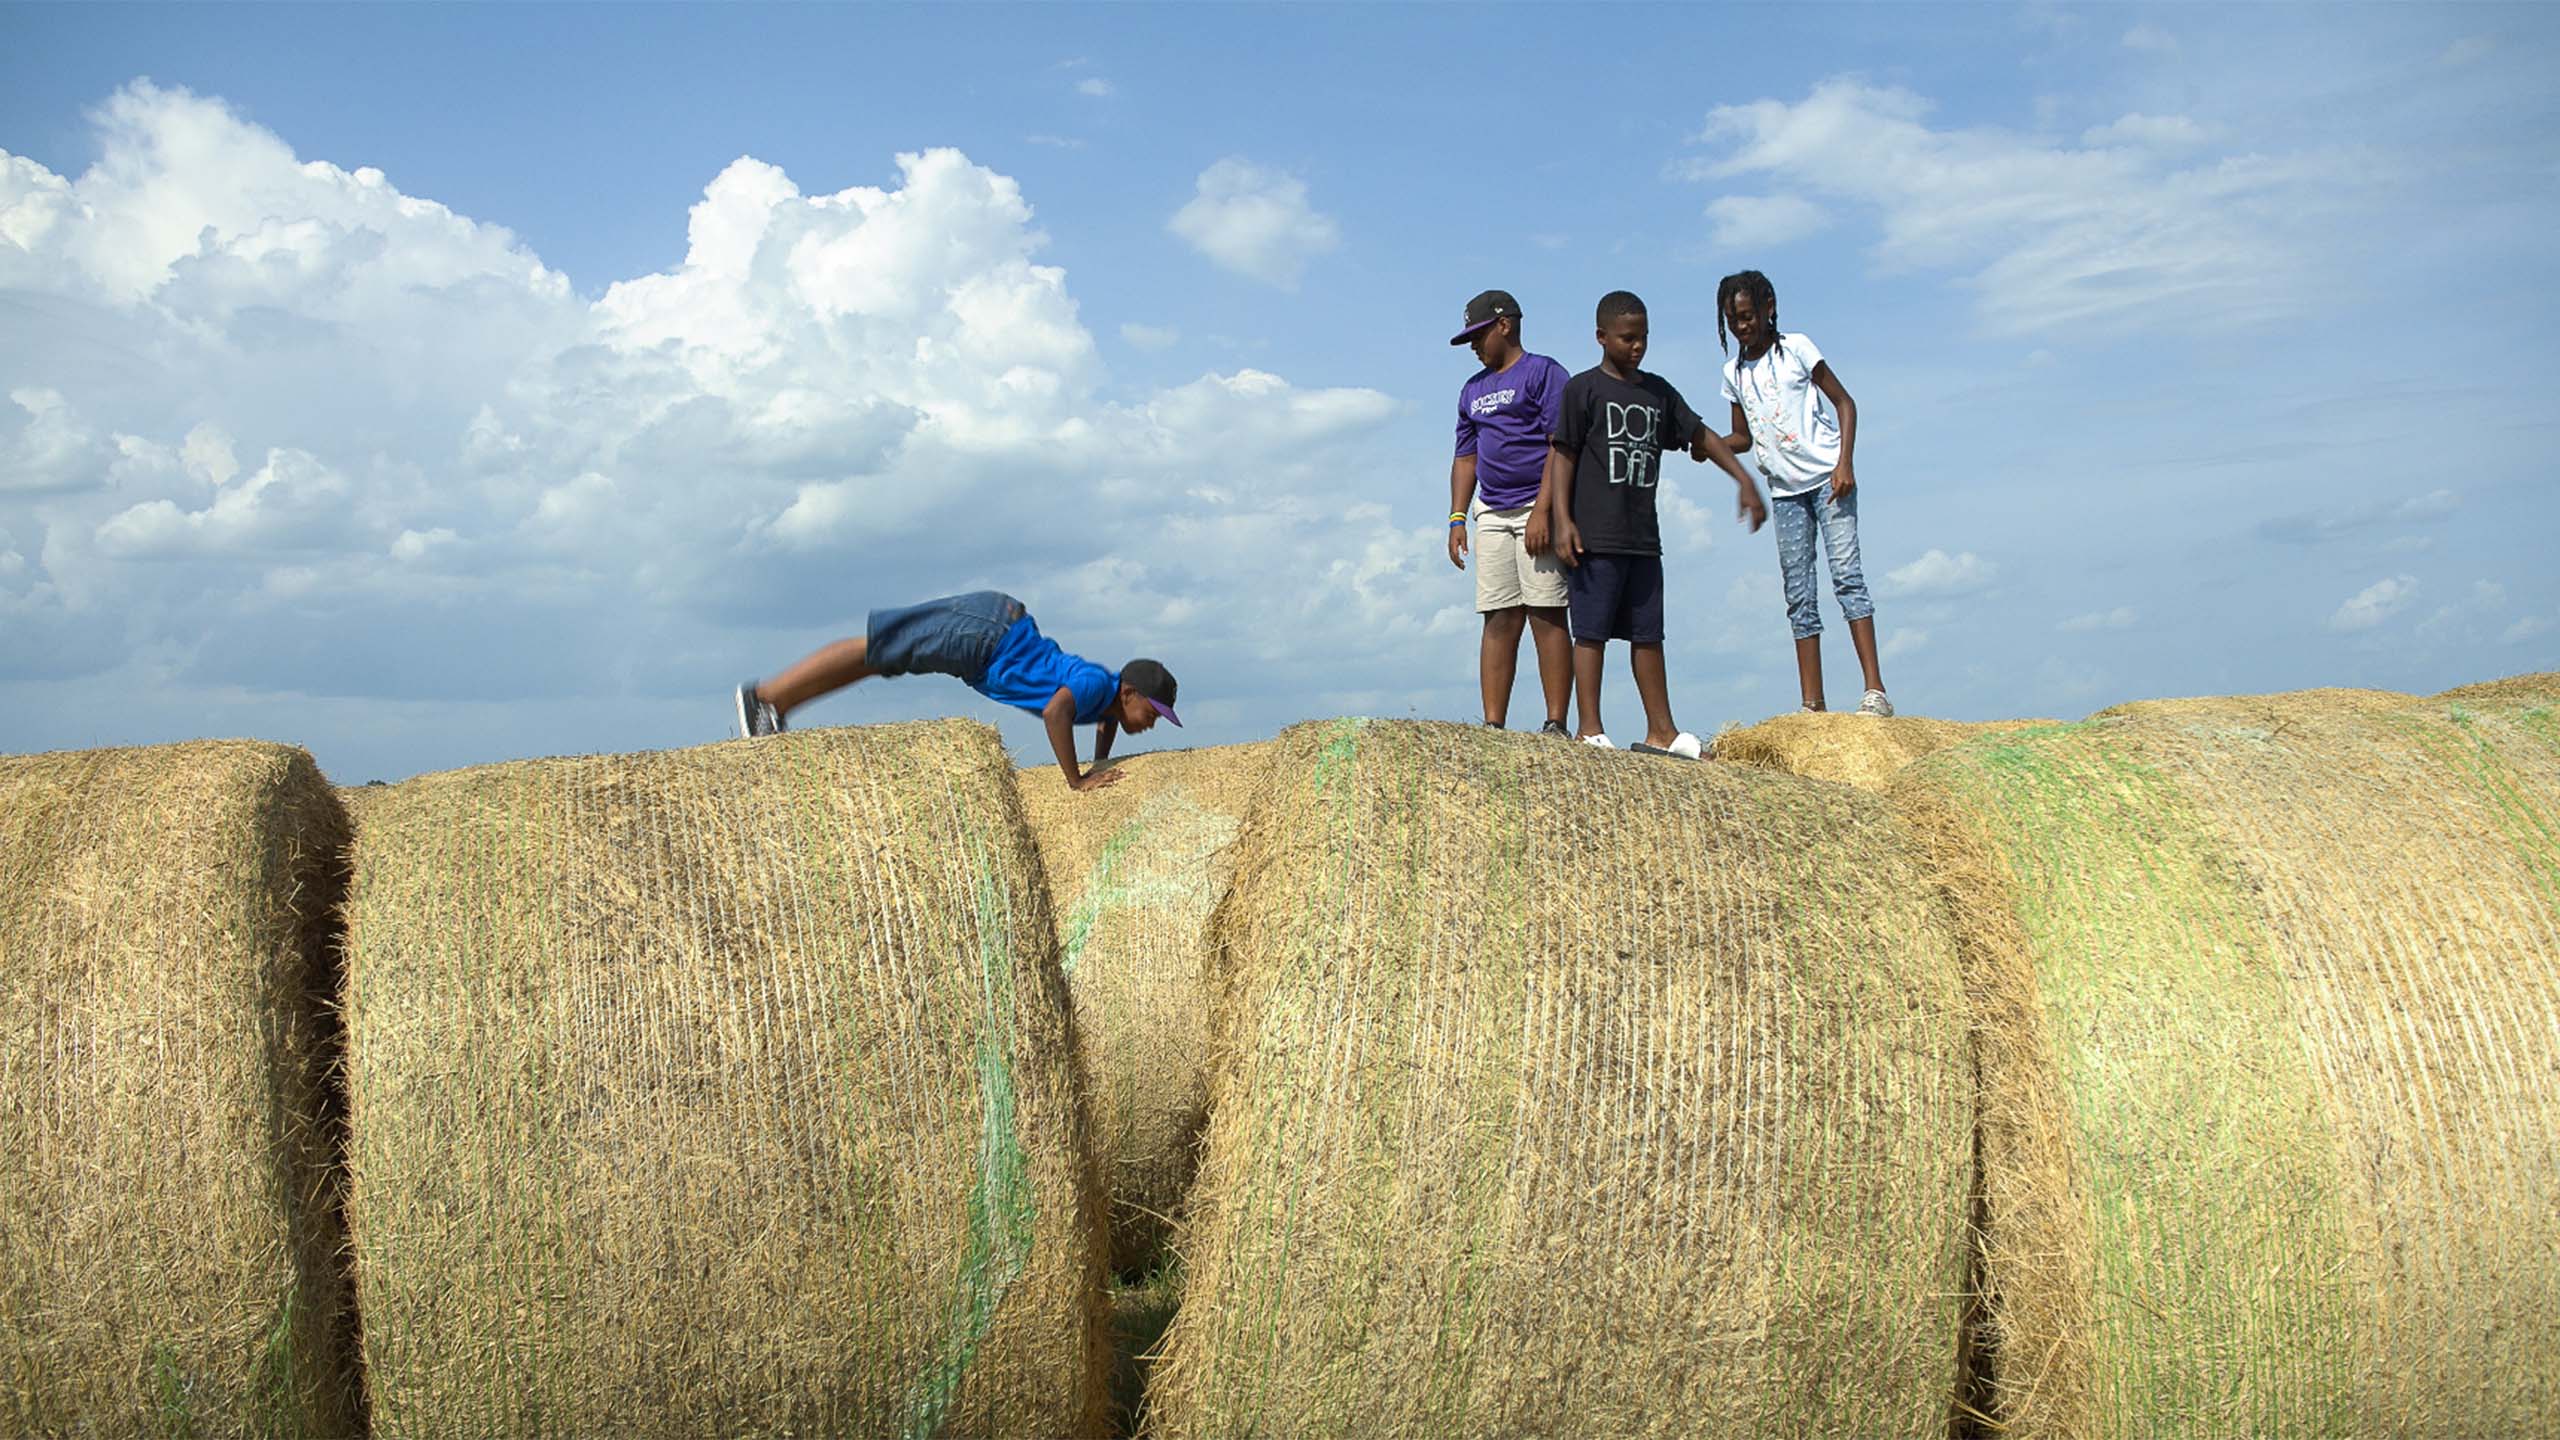 Kimberly Ratcliff and Jeremy Coleman's children play together on barrels of hay. July 2019